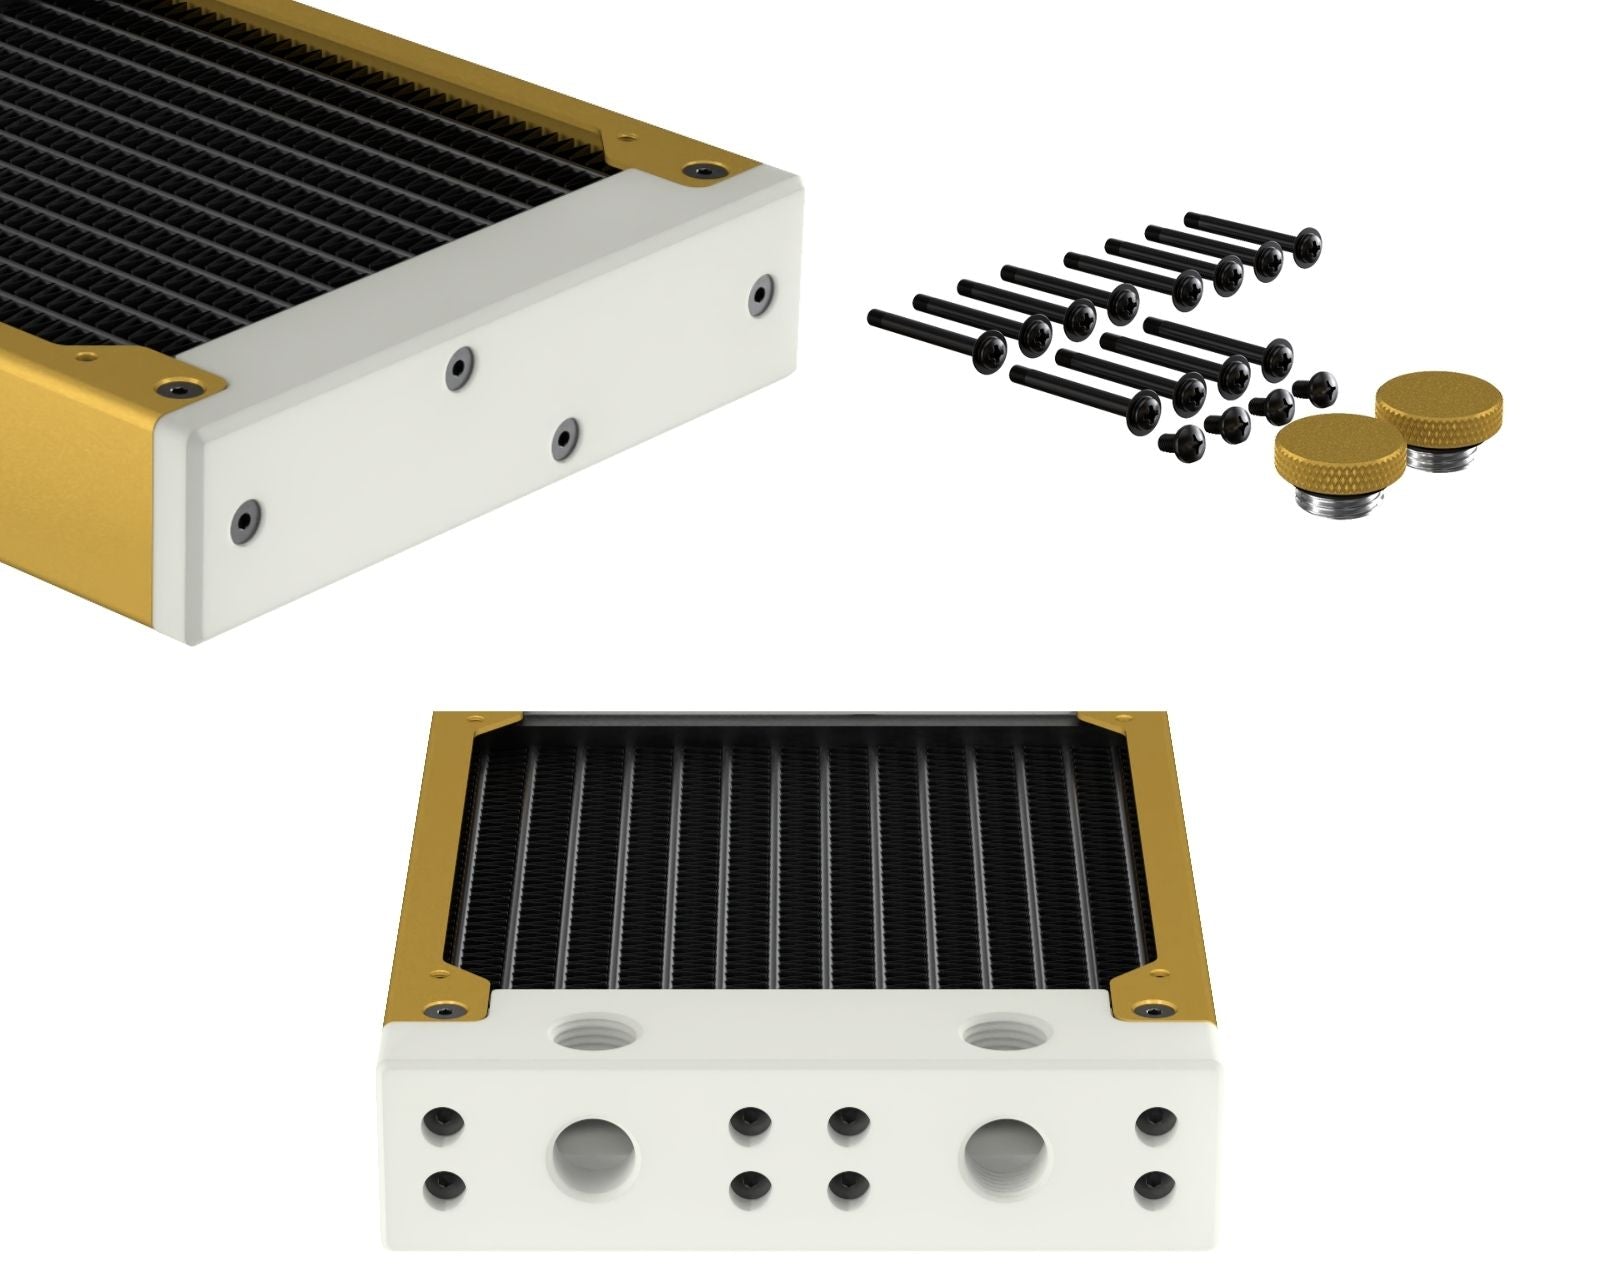 PrimoChill 360SL (30mm) EXIMO Modular Radiator, White POM, 3x120mm, Triple Fan (R-SL-W36) Available in 20+ Colors, Assembled in USA and Custom Watercooling Loop Ready - Gold